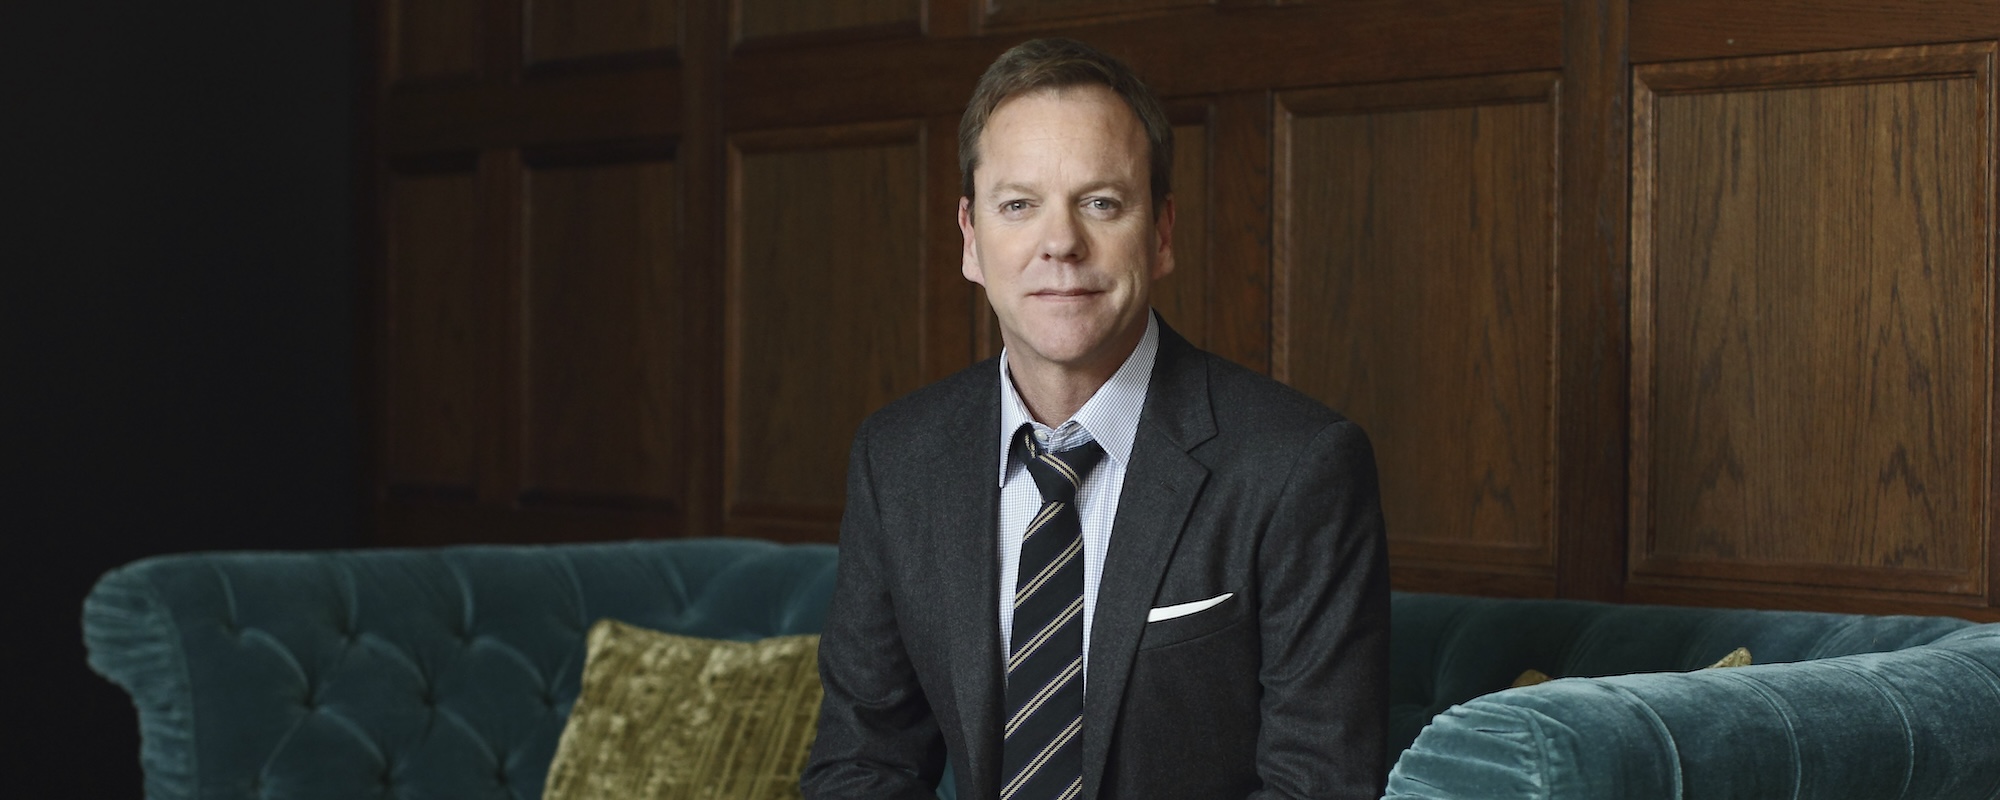 3 Songs You Didn’t Know Kiefer Sutherland Wrote